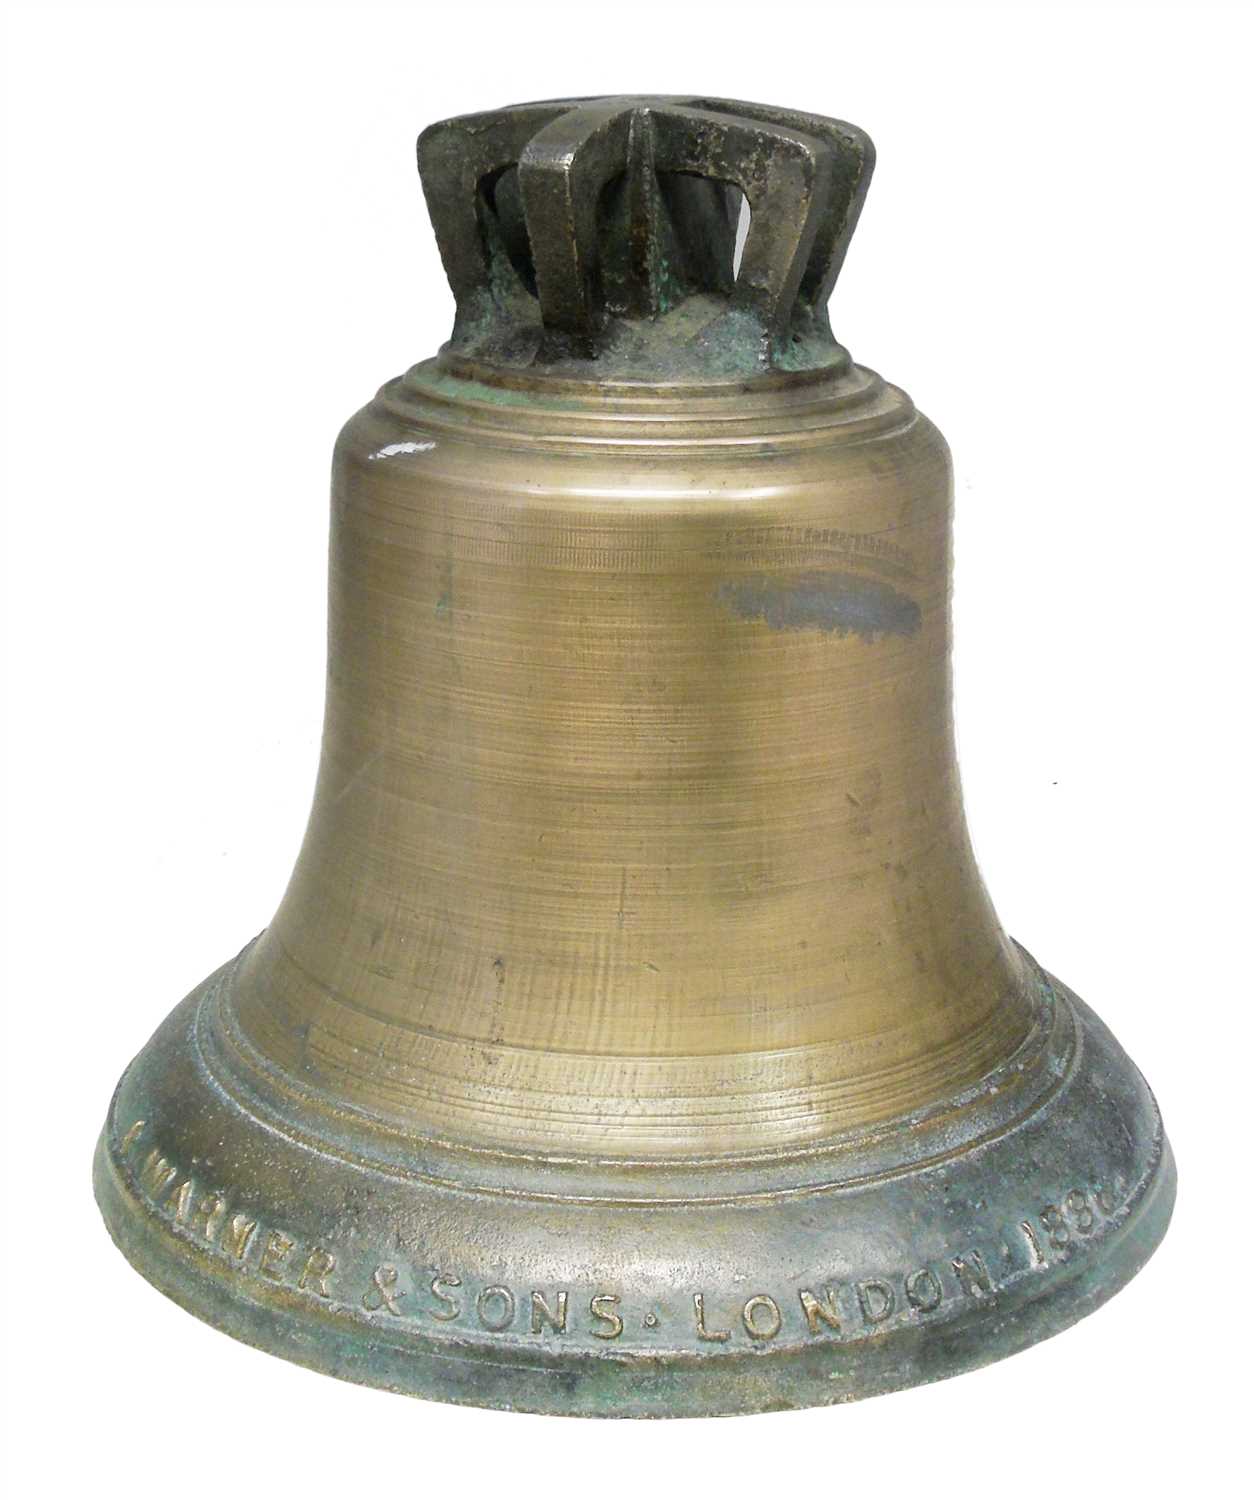 Lot 322 - Bronze bell marked J. Warner and Sons, London, 1886